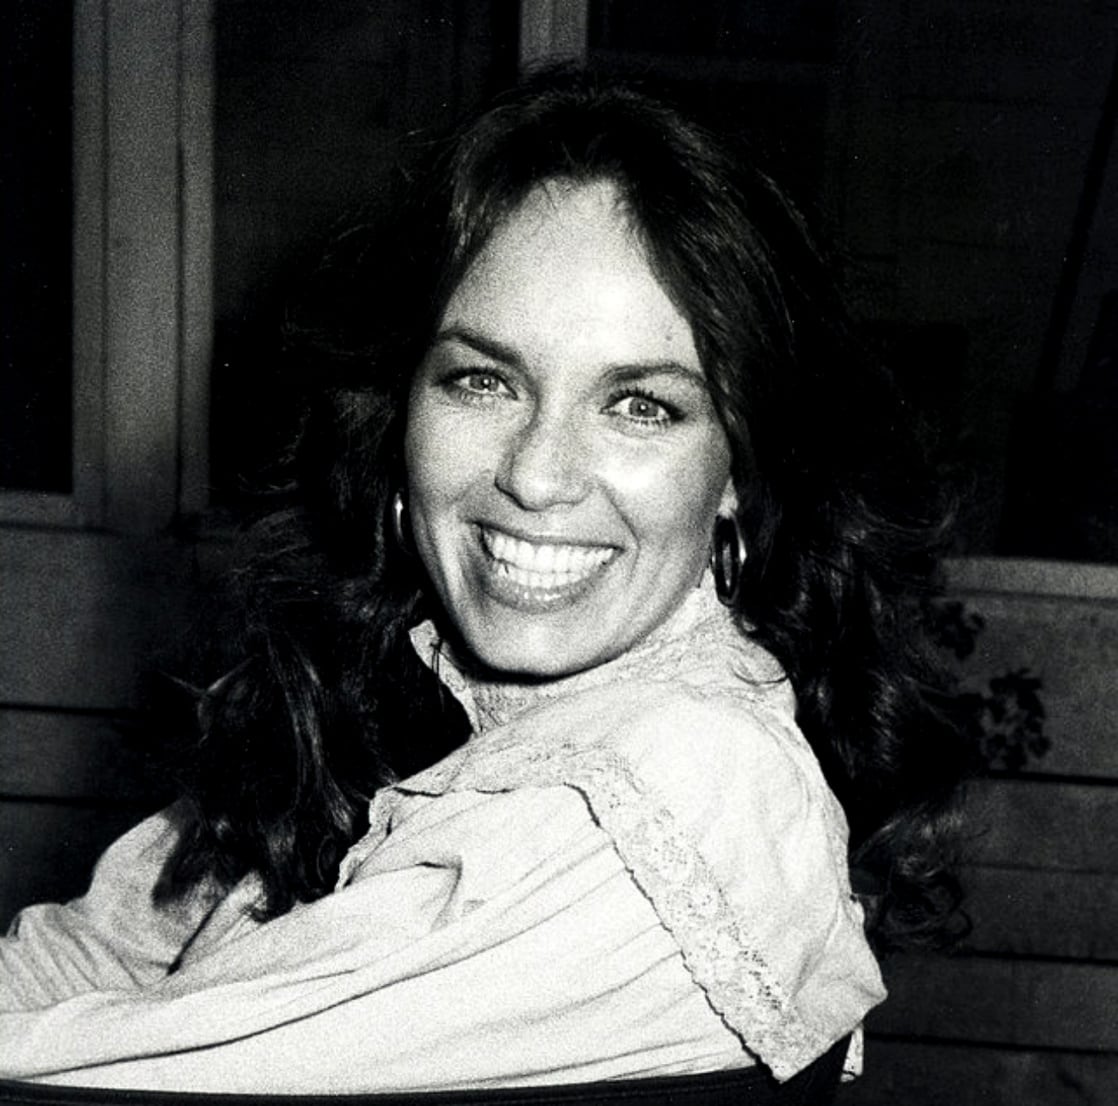 Image of Catherine Bach